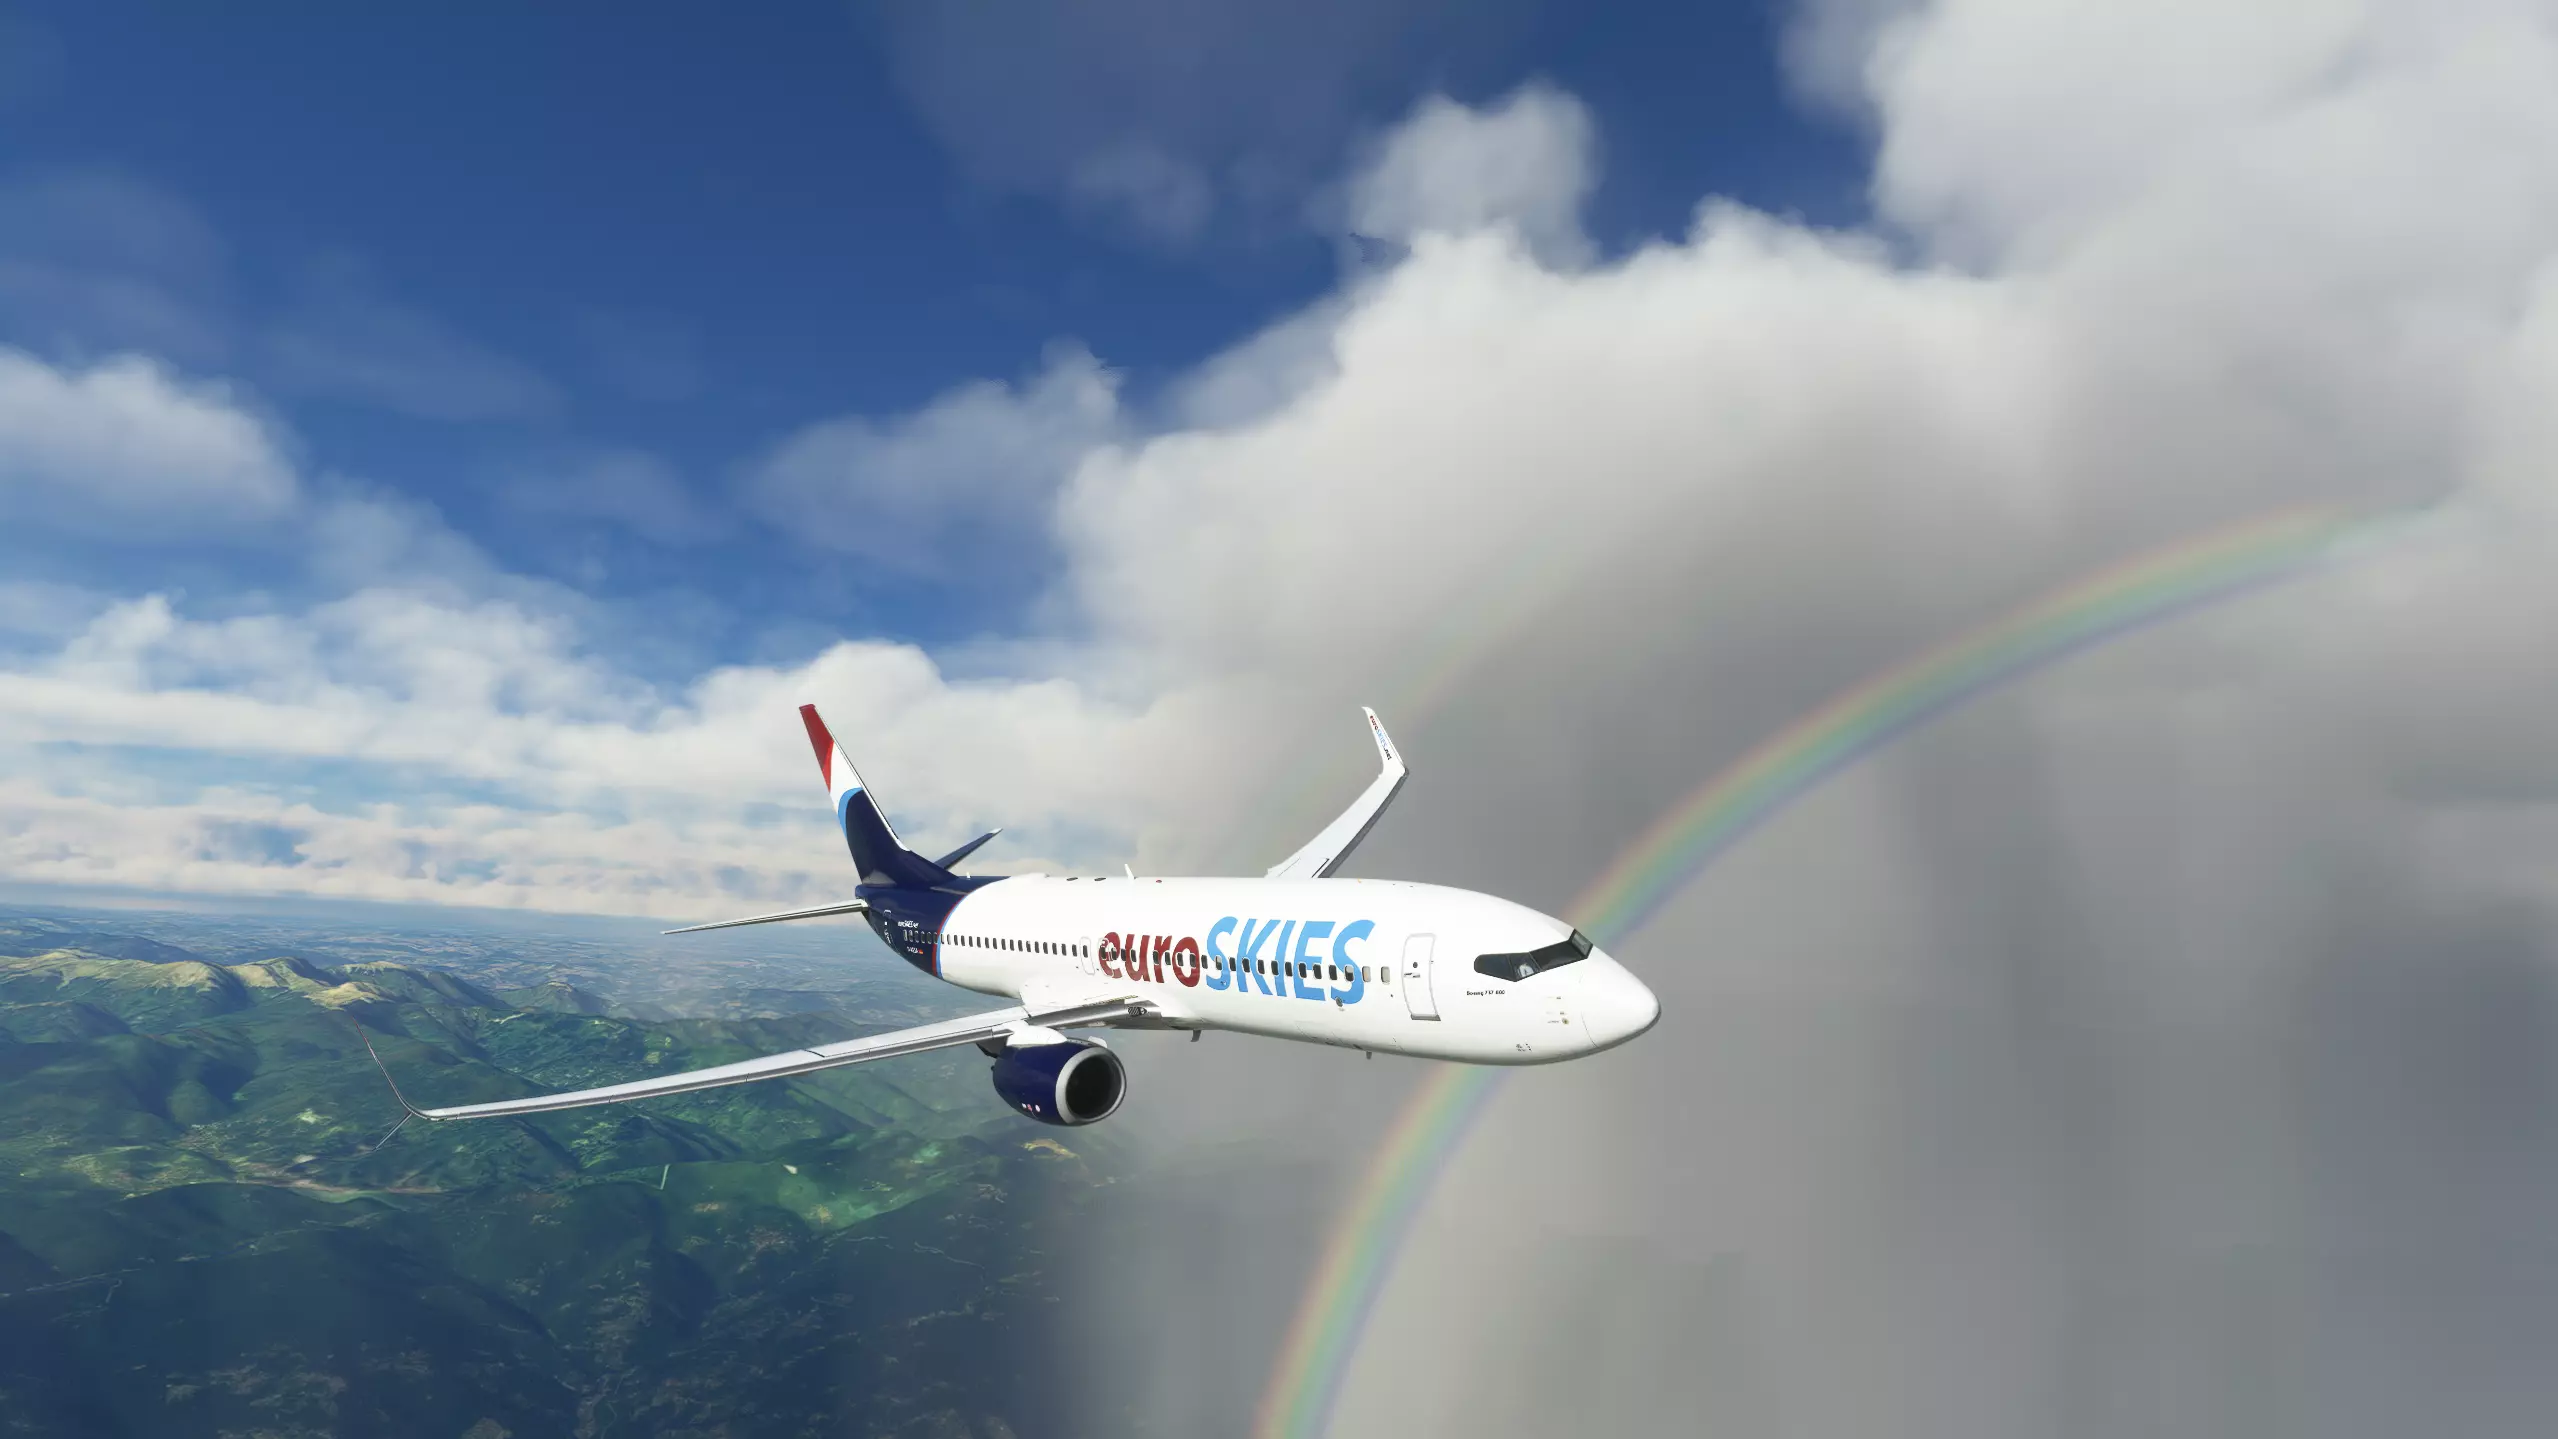 euroSKIES virtual airline Boeing 737 with operations in front of a rainbow